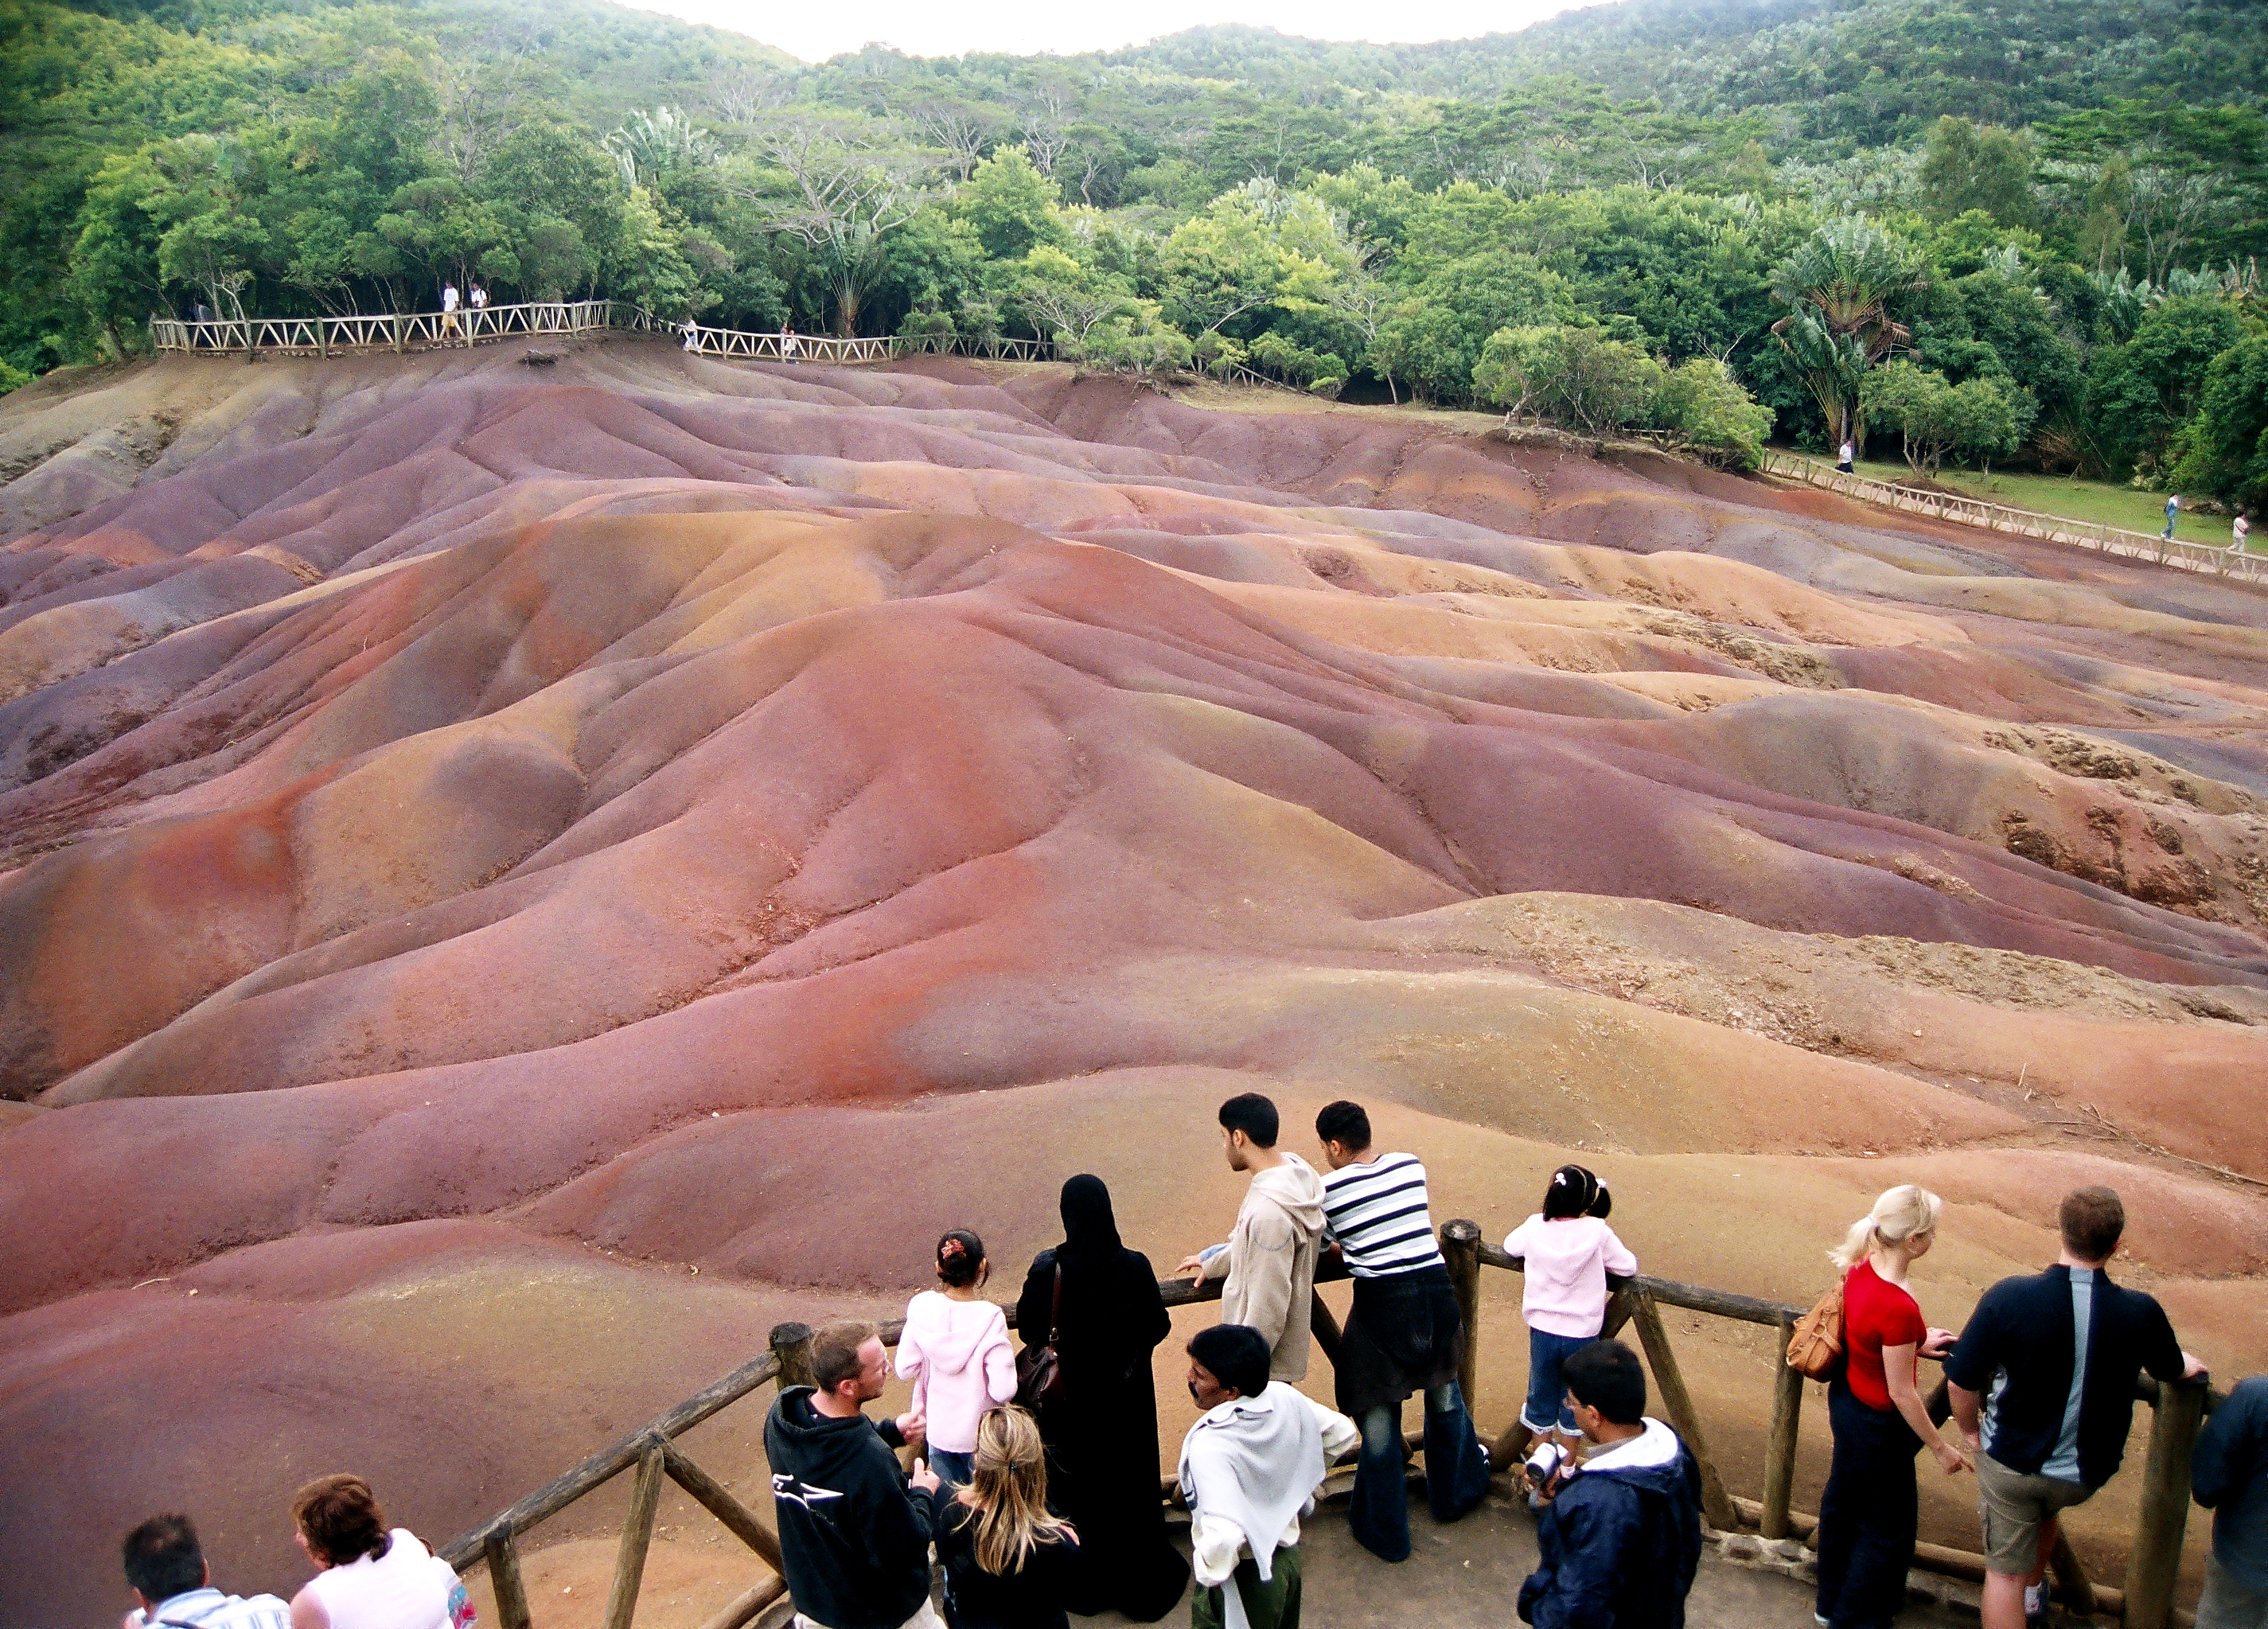 Some tourists at Chamarel seven colored sand